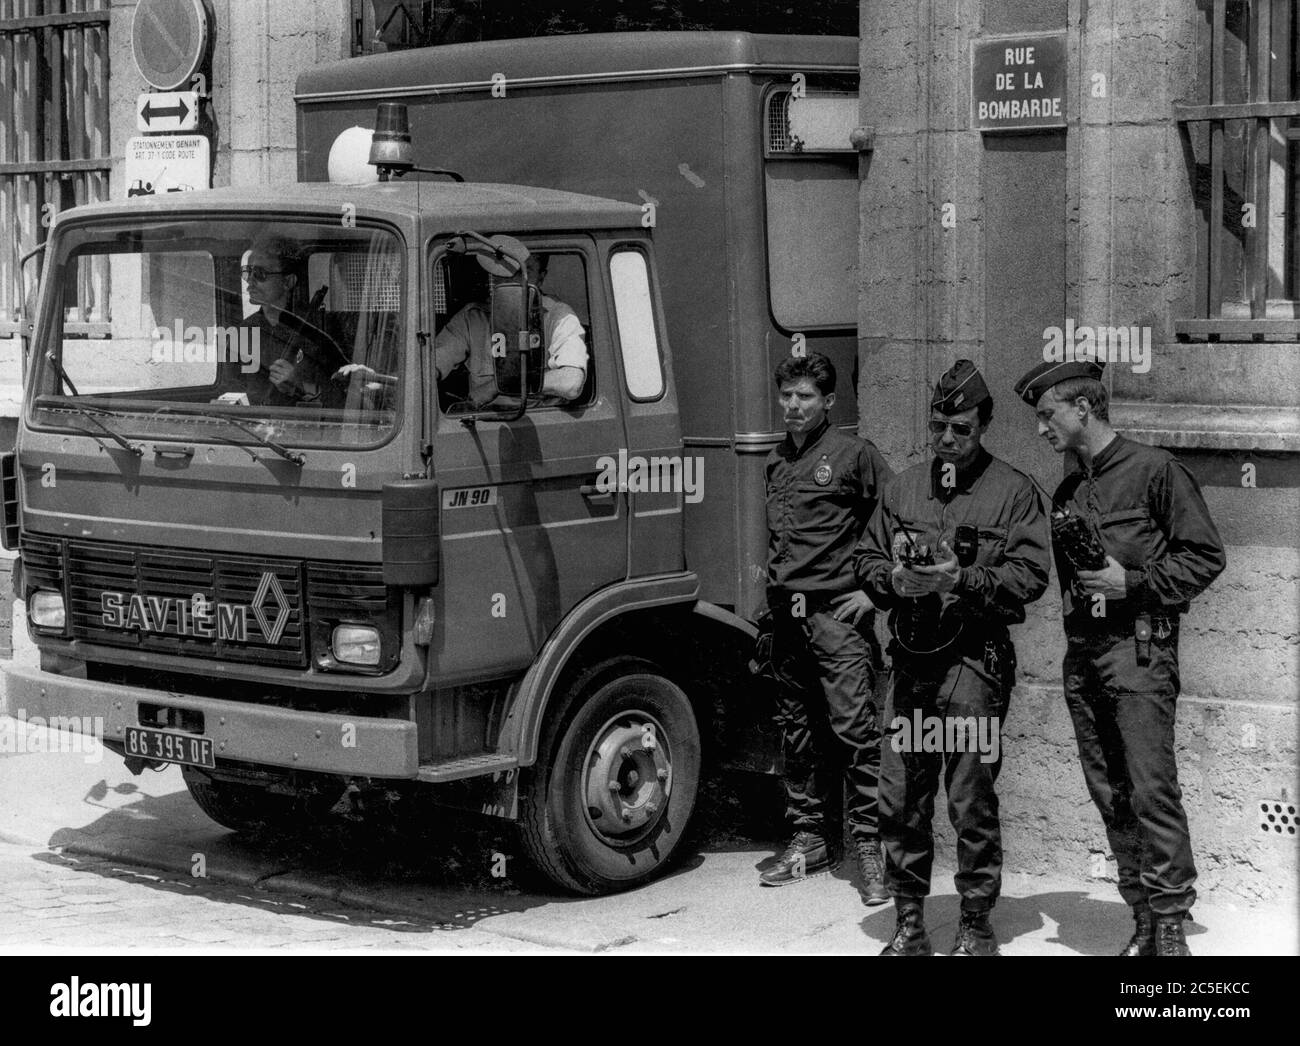 Prison van surrounded by police officer at Lyons Justice Court, France  Stock Photo - Alamy